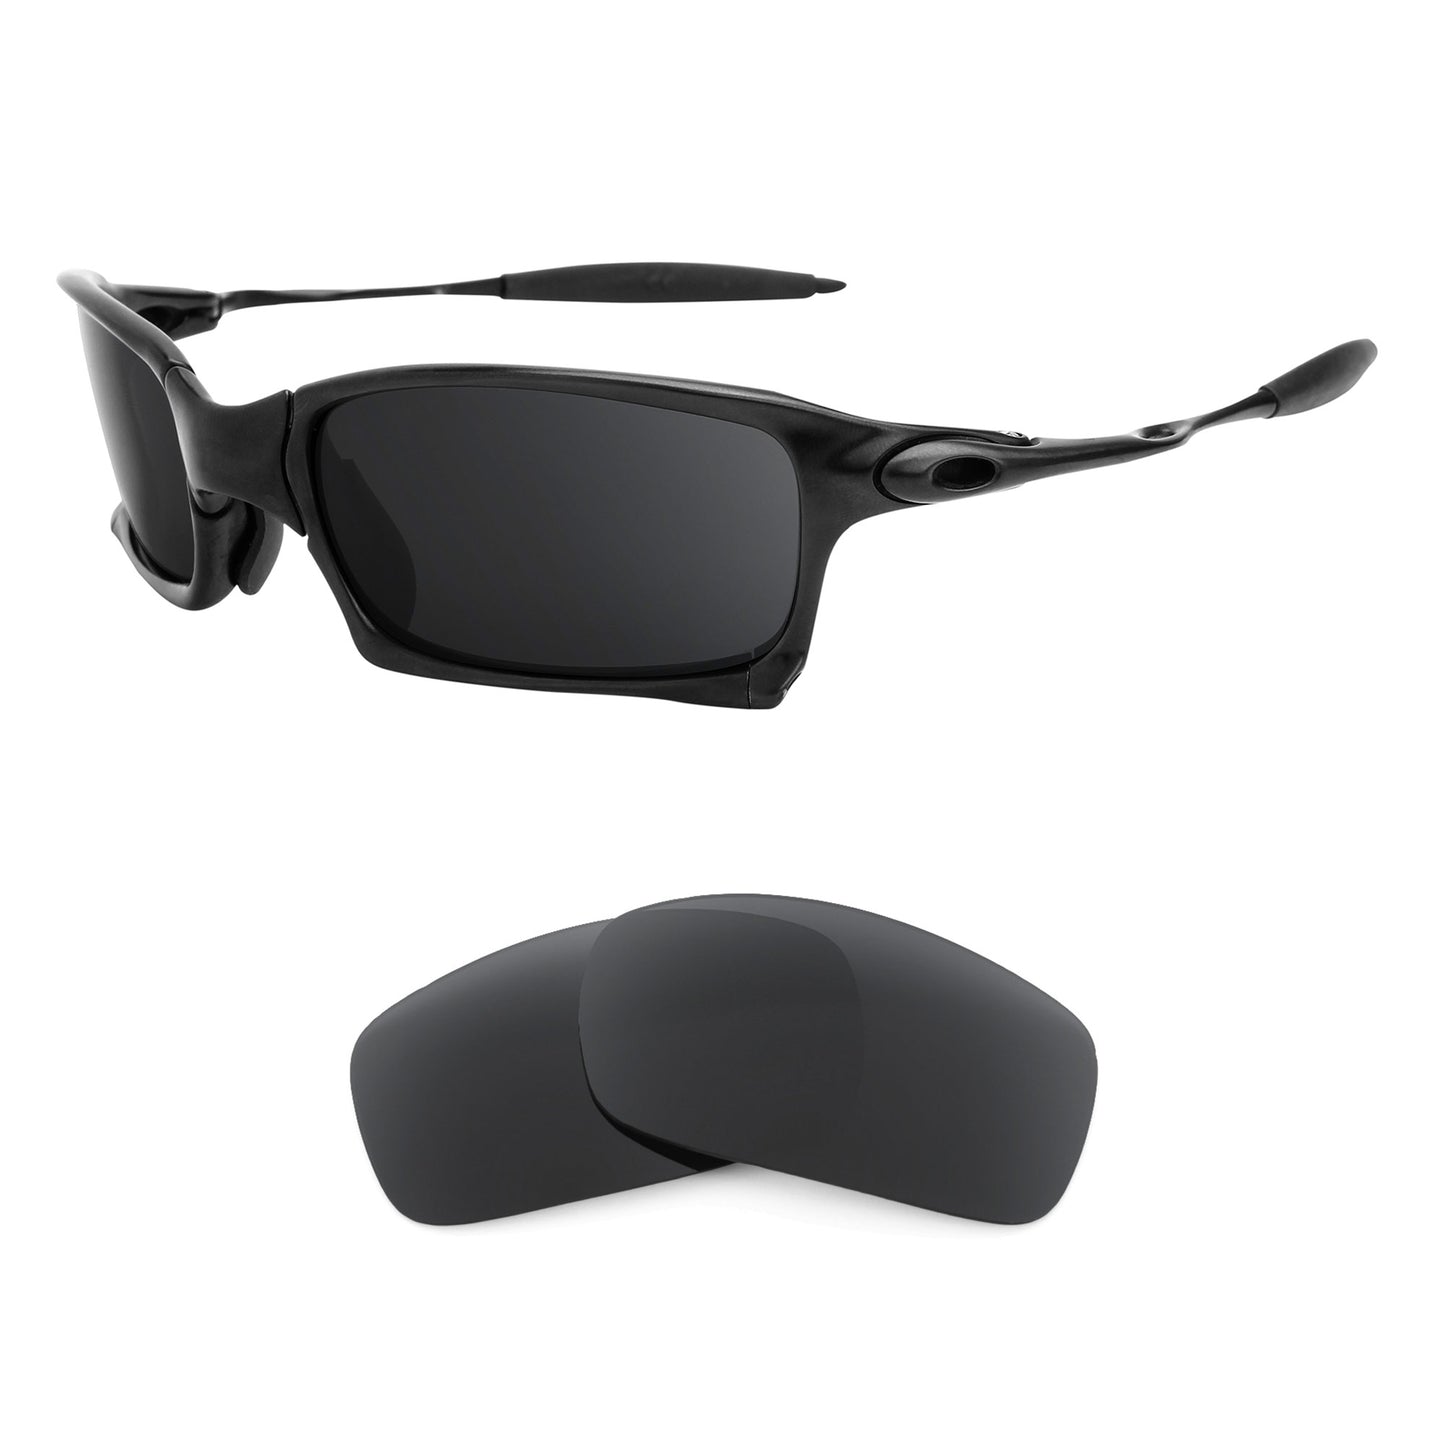 Oakley X Squared sunglasses with replacement lenses